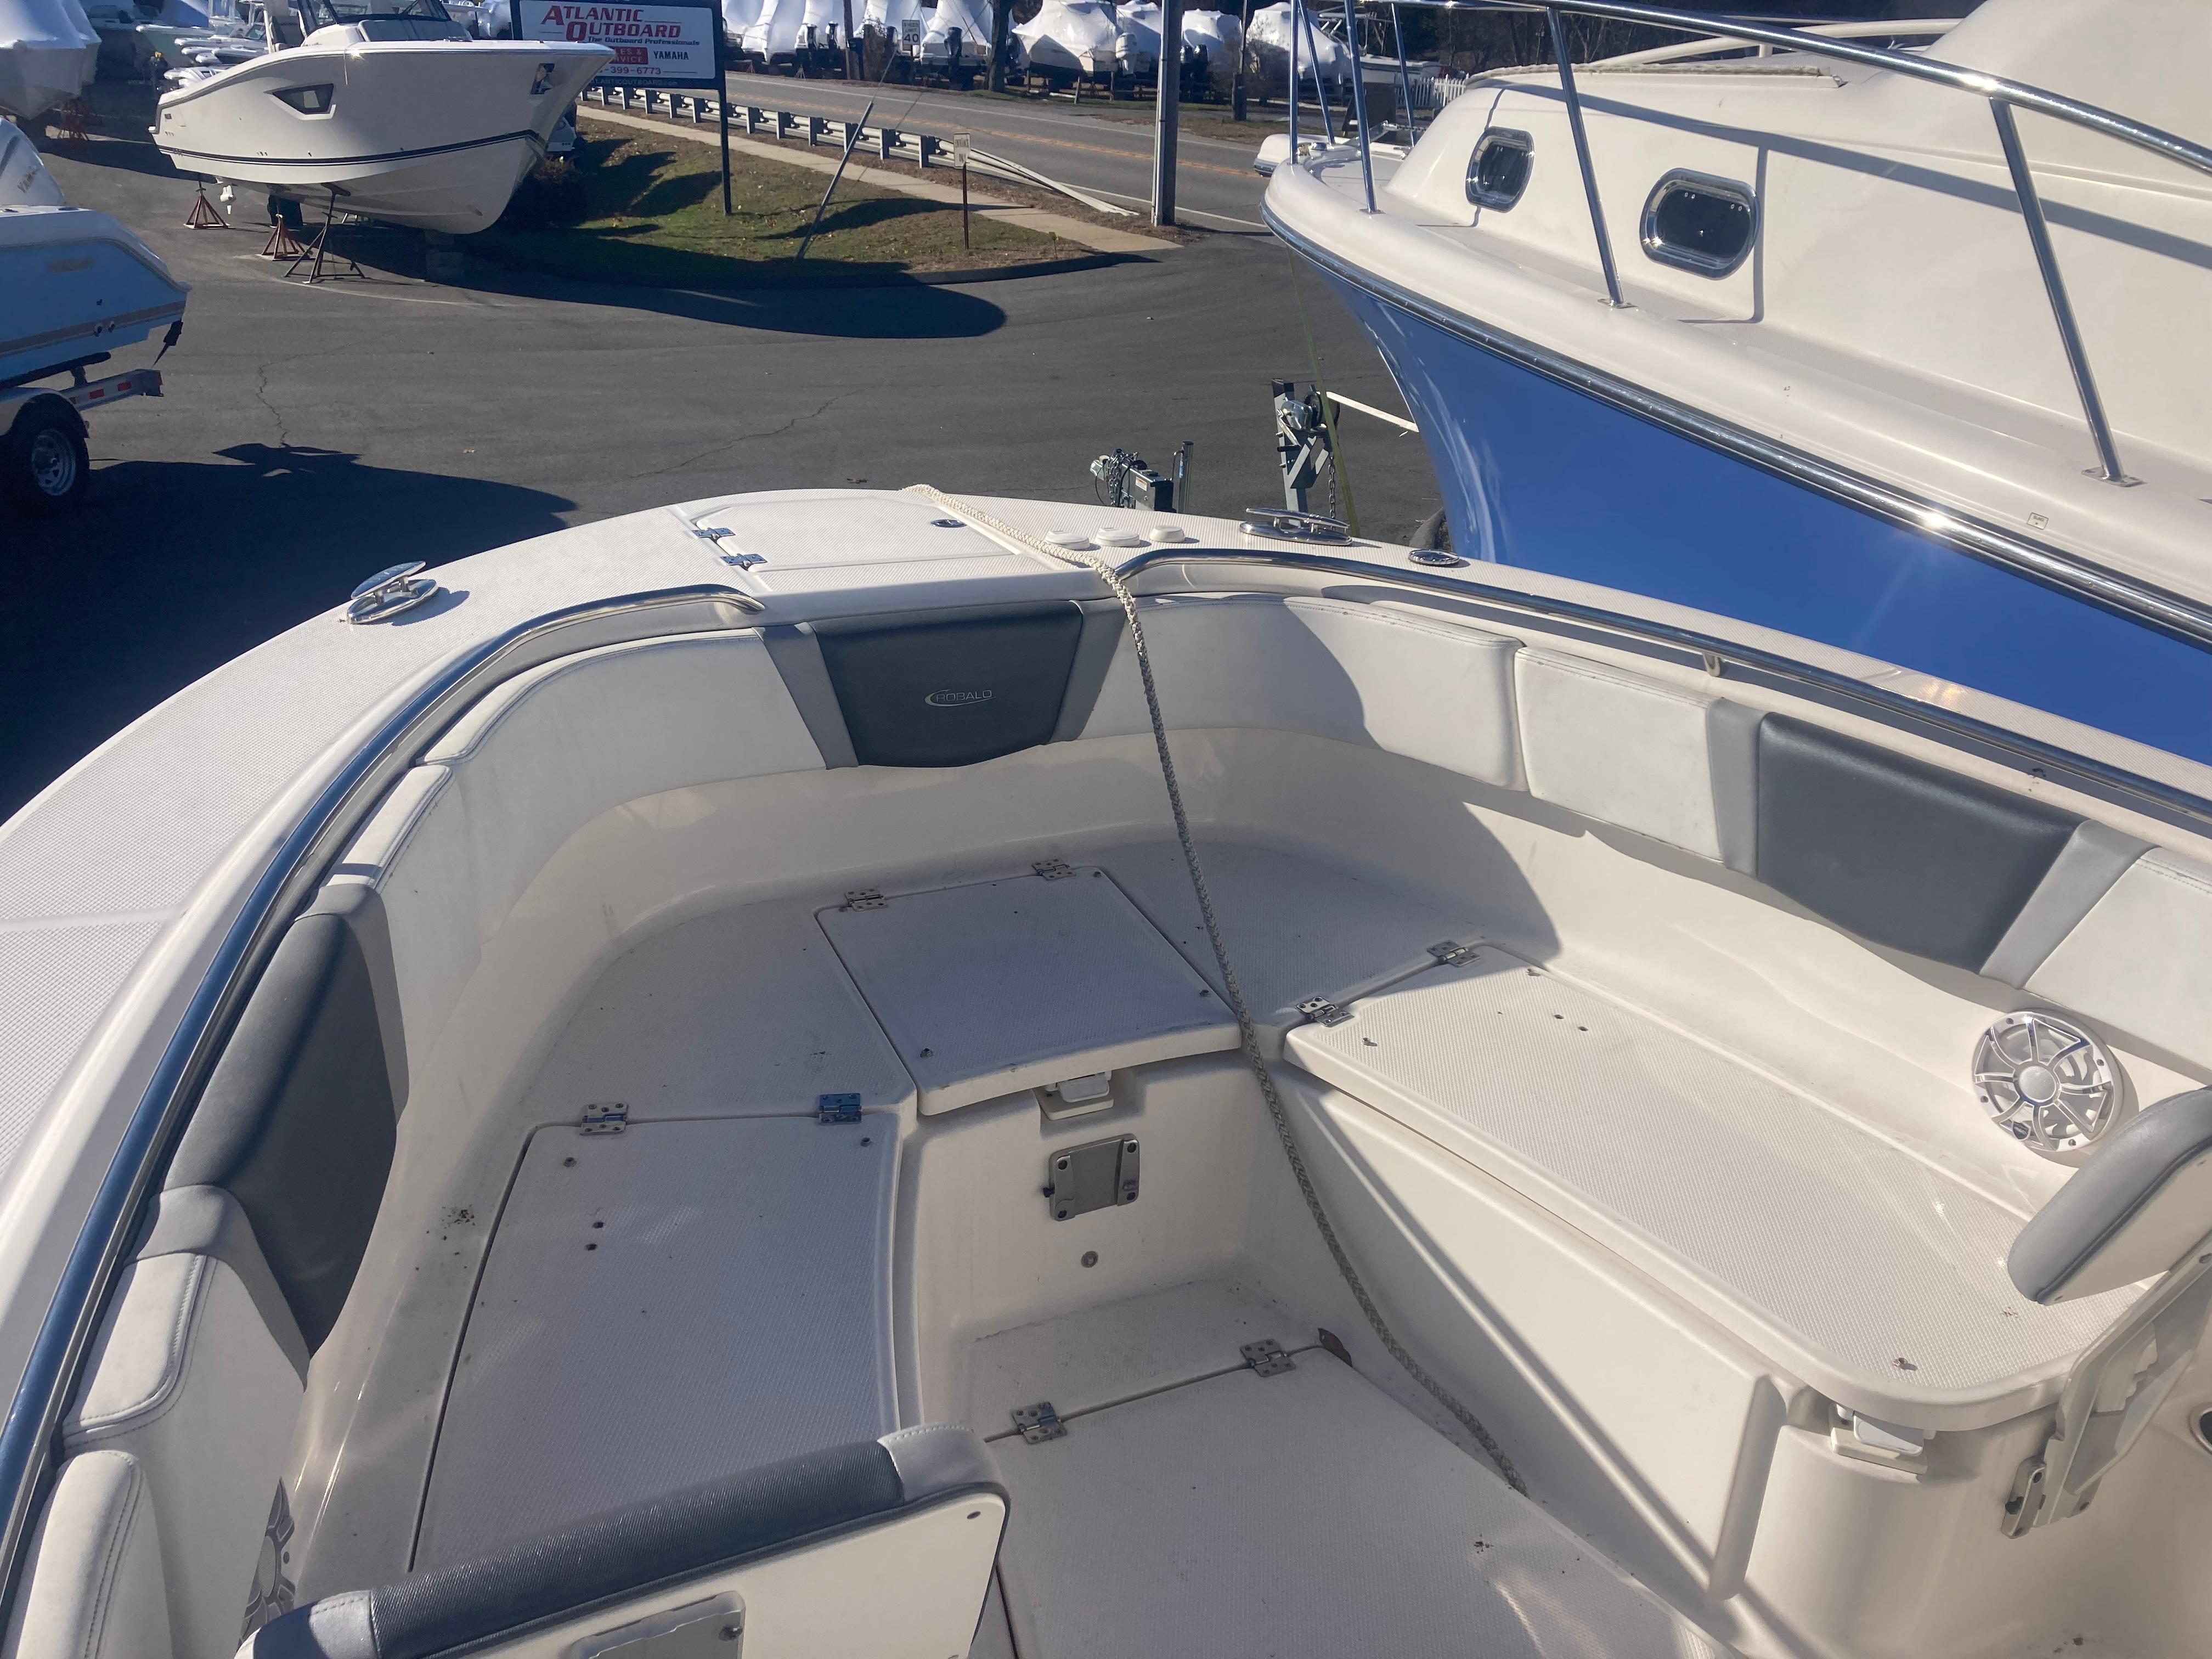 2019 Robalo R 272 Center Console for sale - YachtWorld